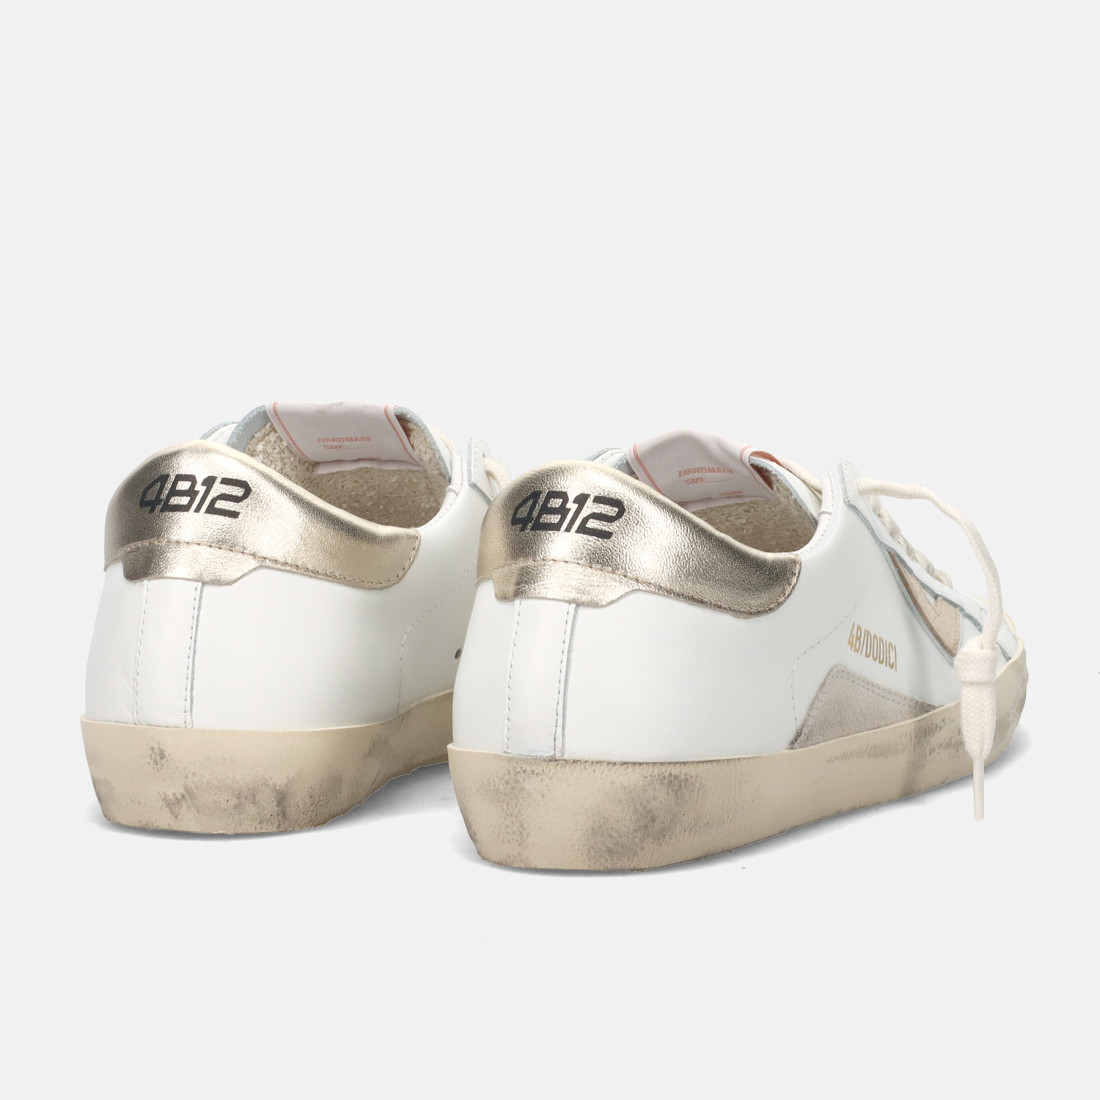 4B12 Suprime women's sneaker in white leather and platinum